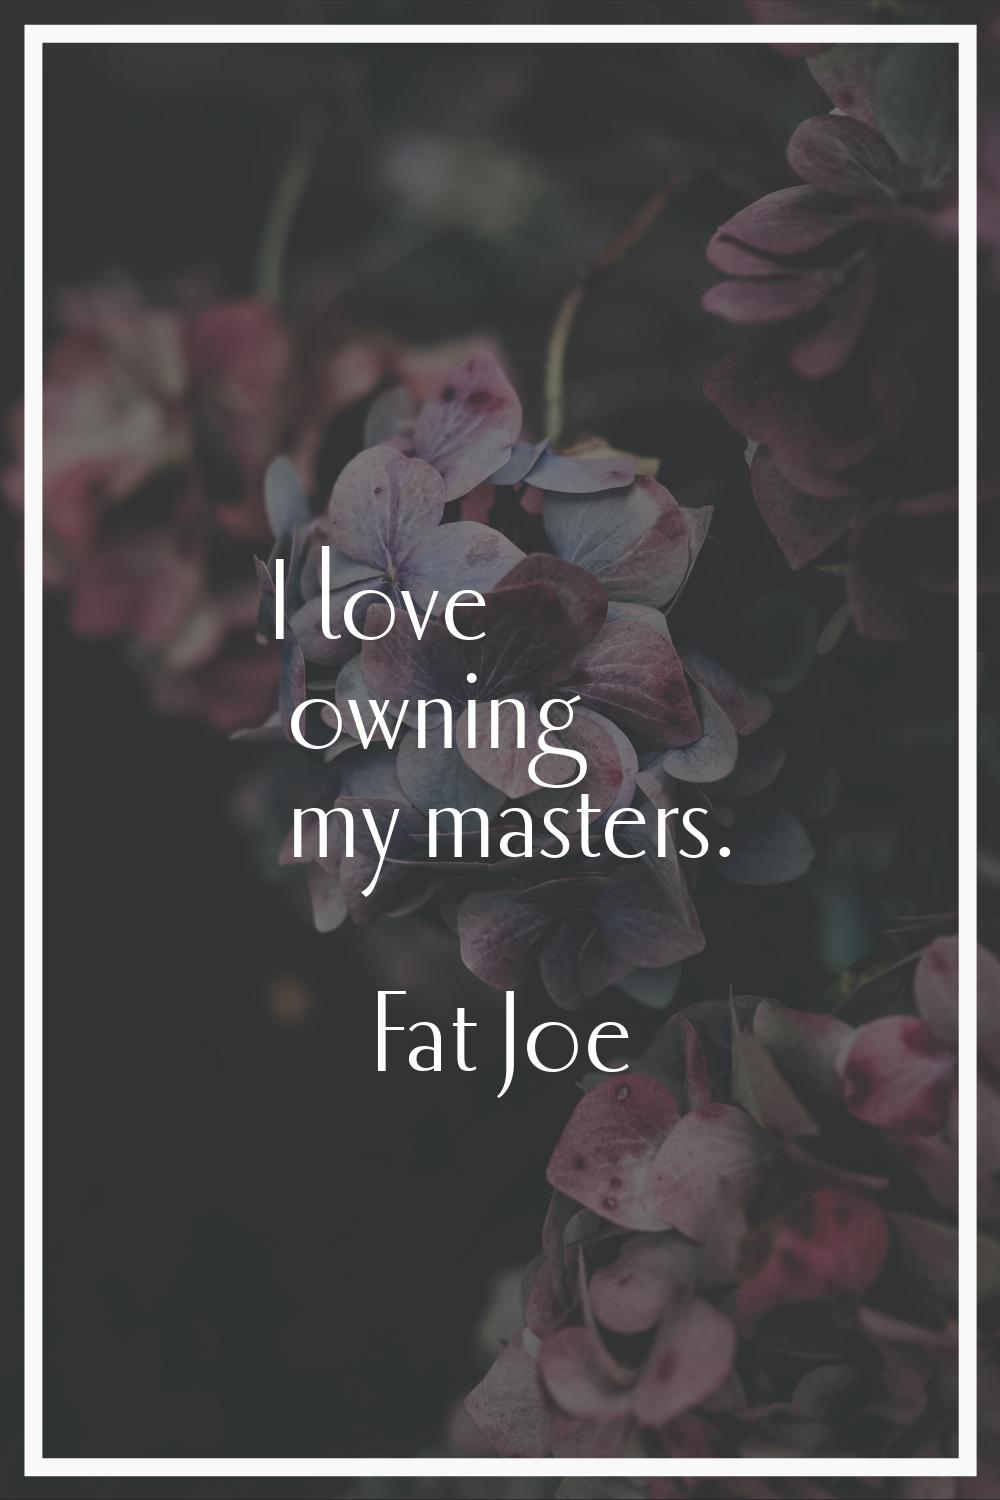 I love owning my masters.